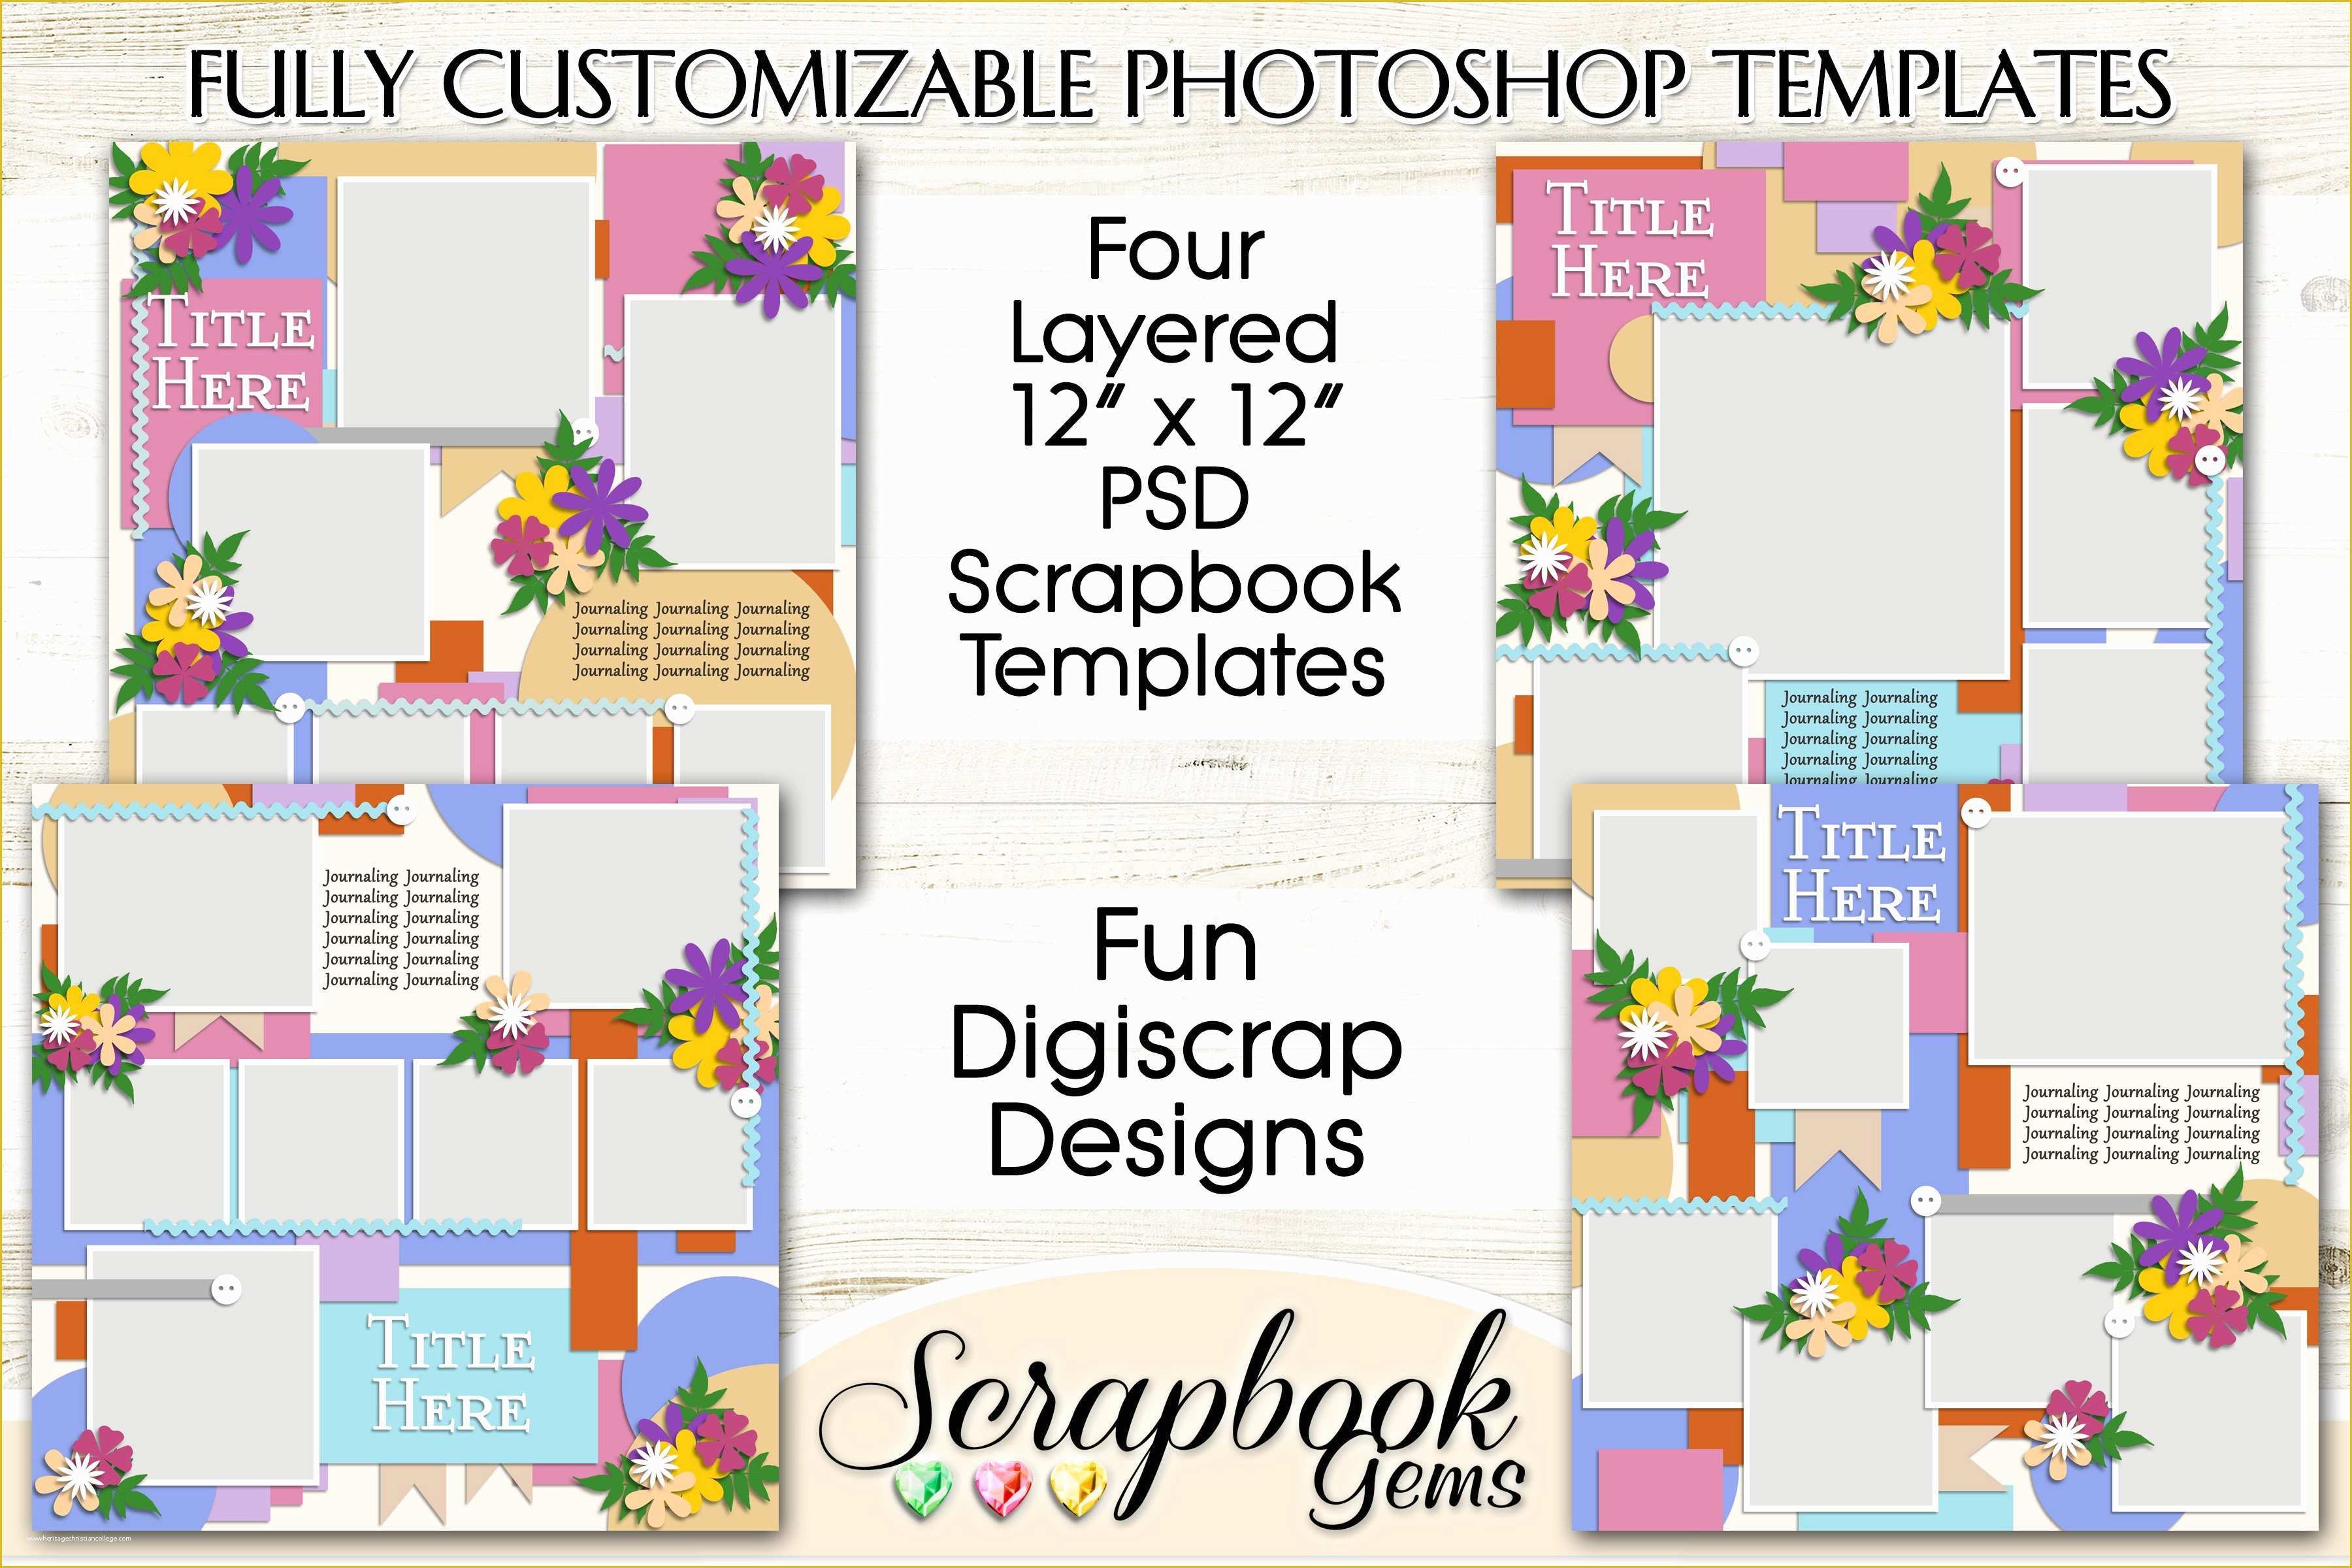 Free Scrapbook Templates for Photoshop Of Layered Psd Scrapbook Templates Templates Creative Market